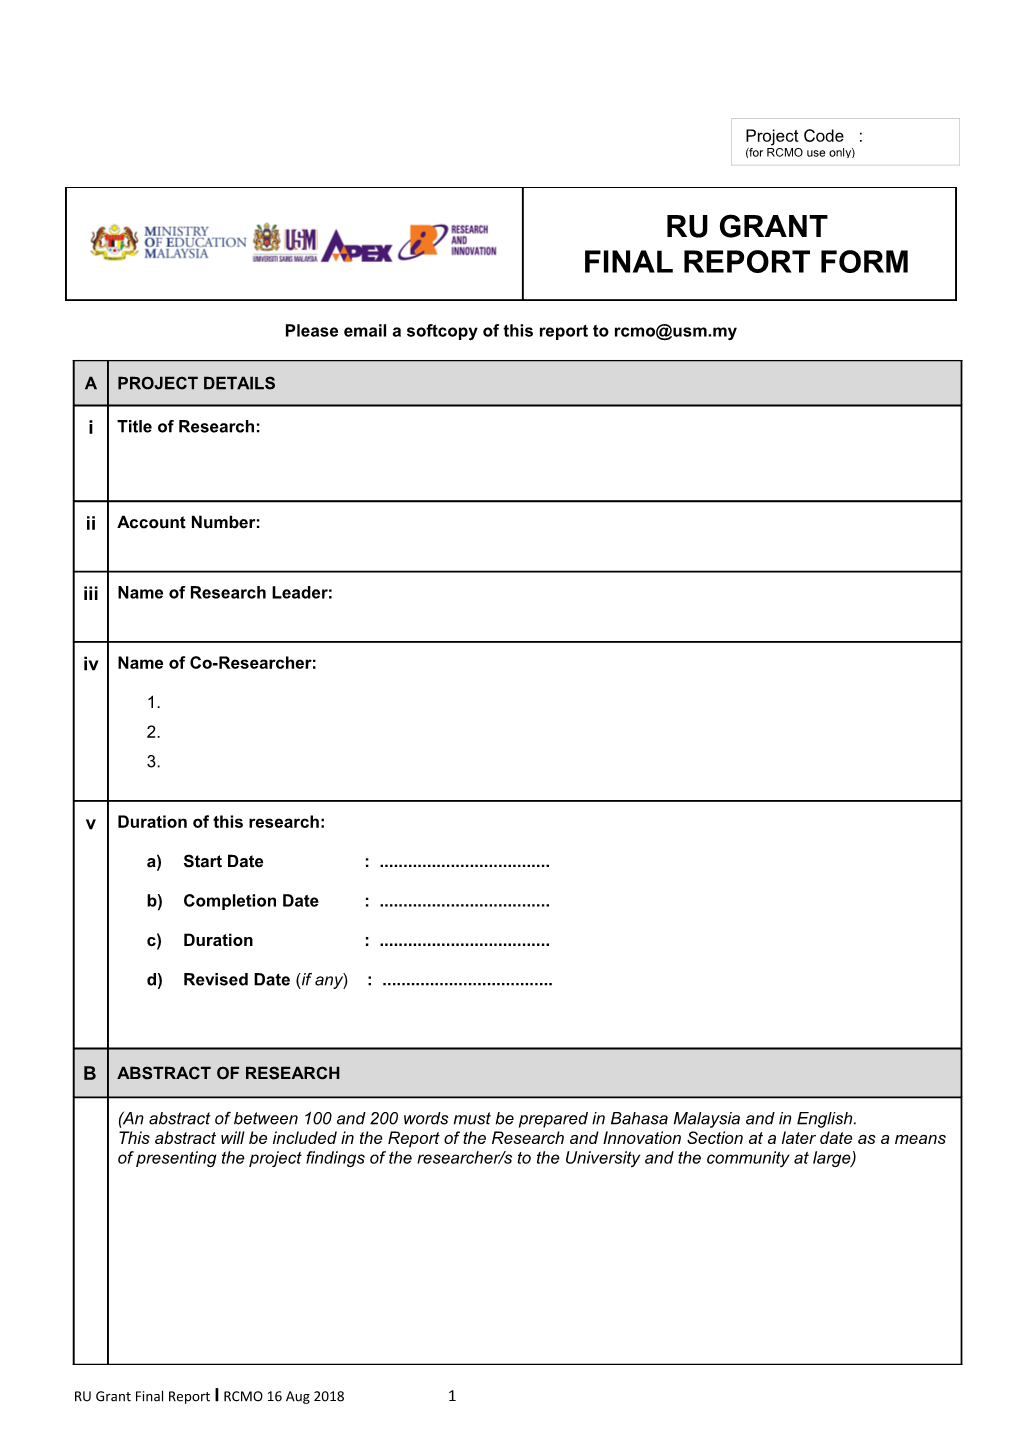 Please Email a Softcopy of This Report To